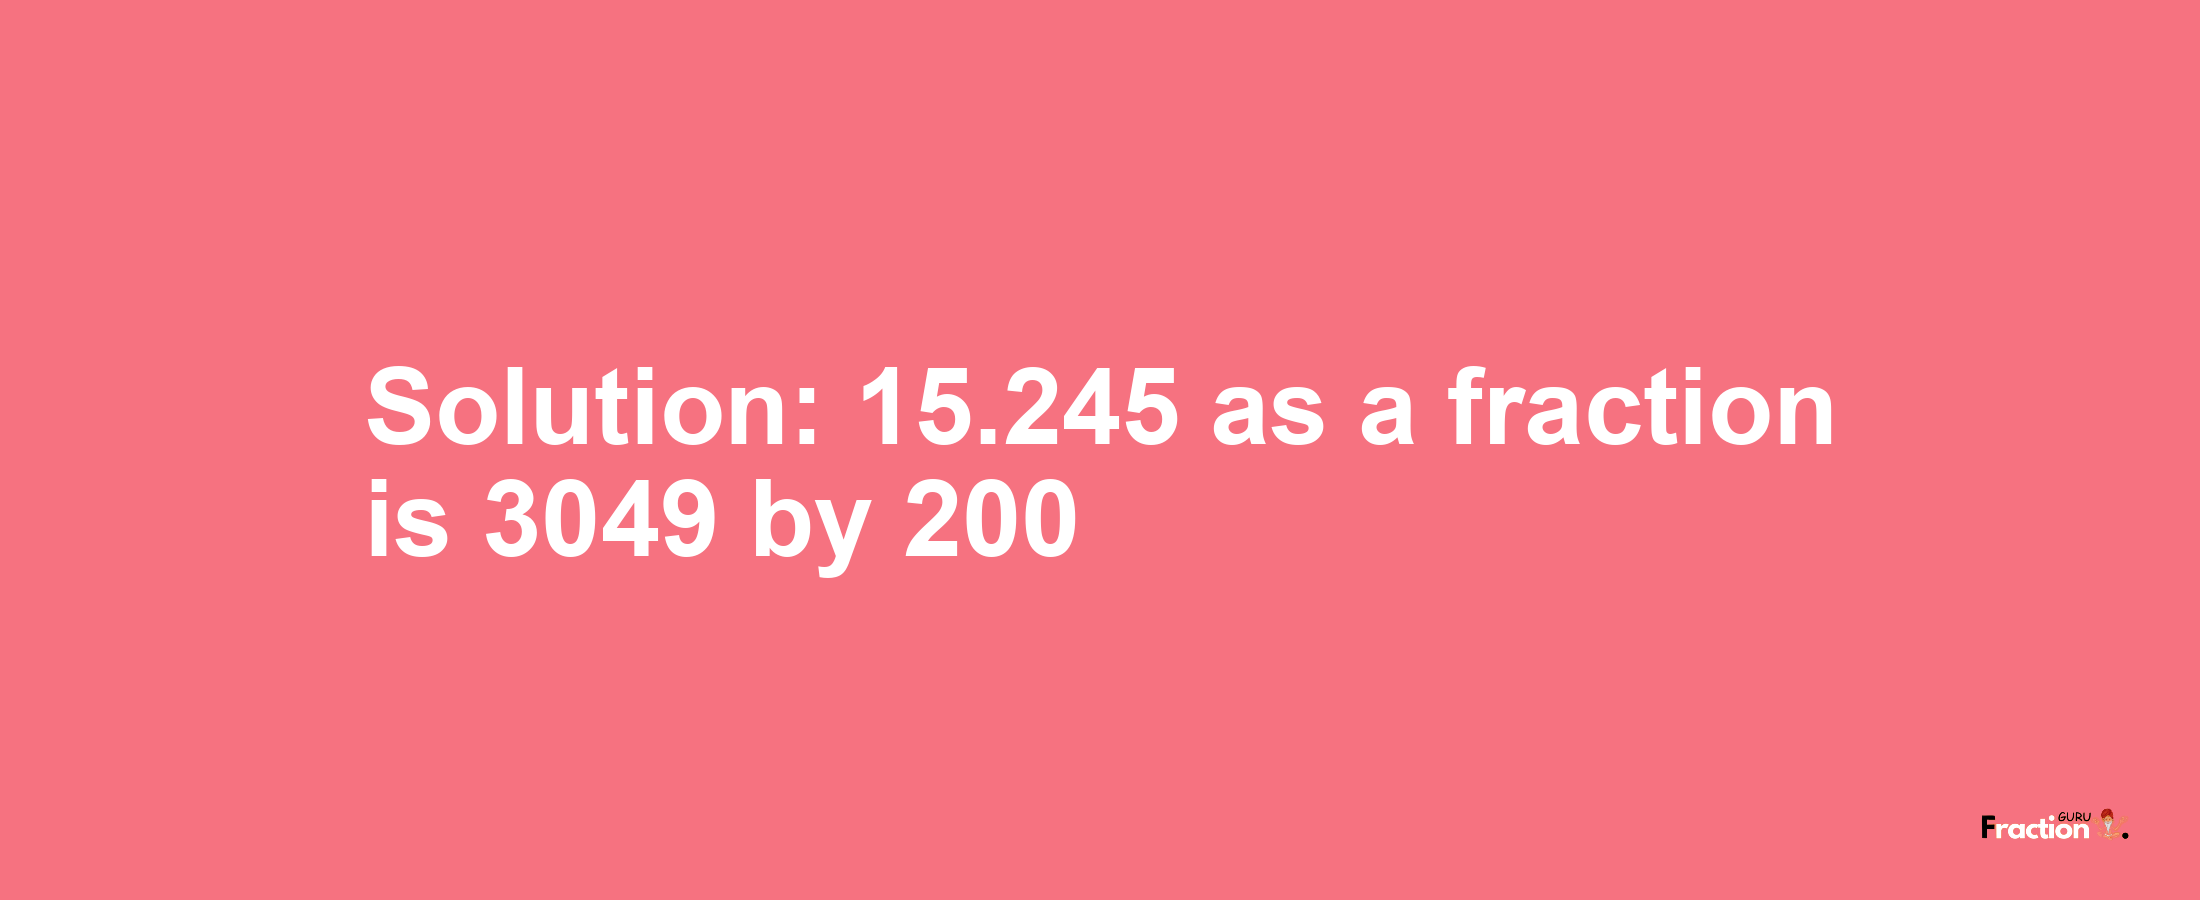 Solution:15.245 as a fraction is 3049/200